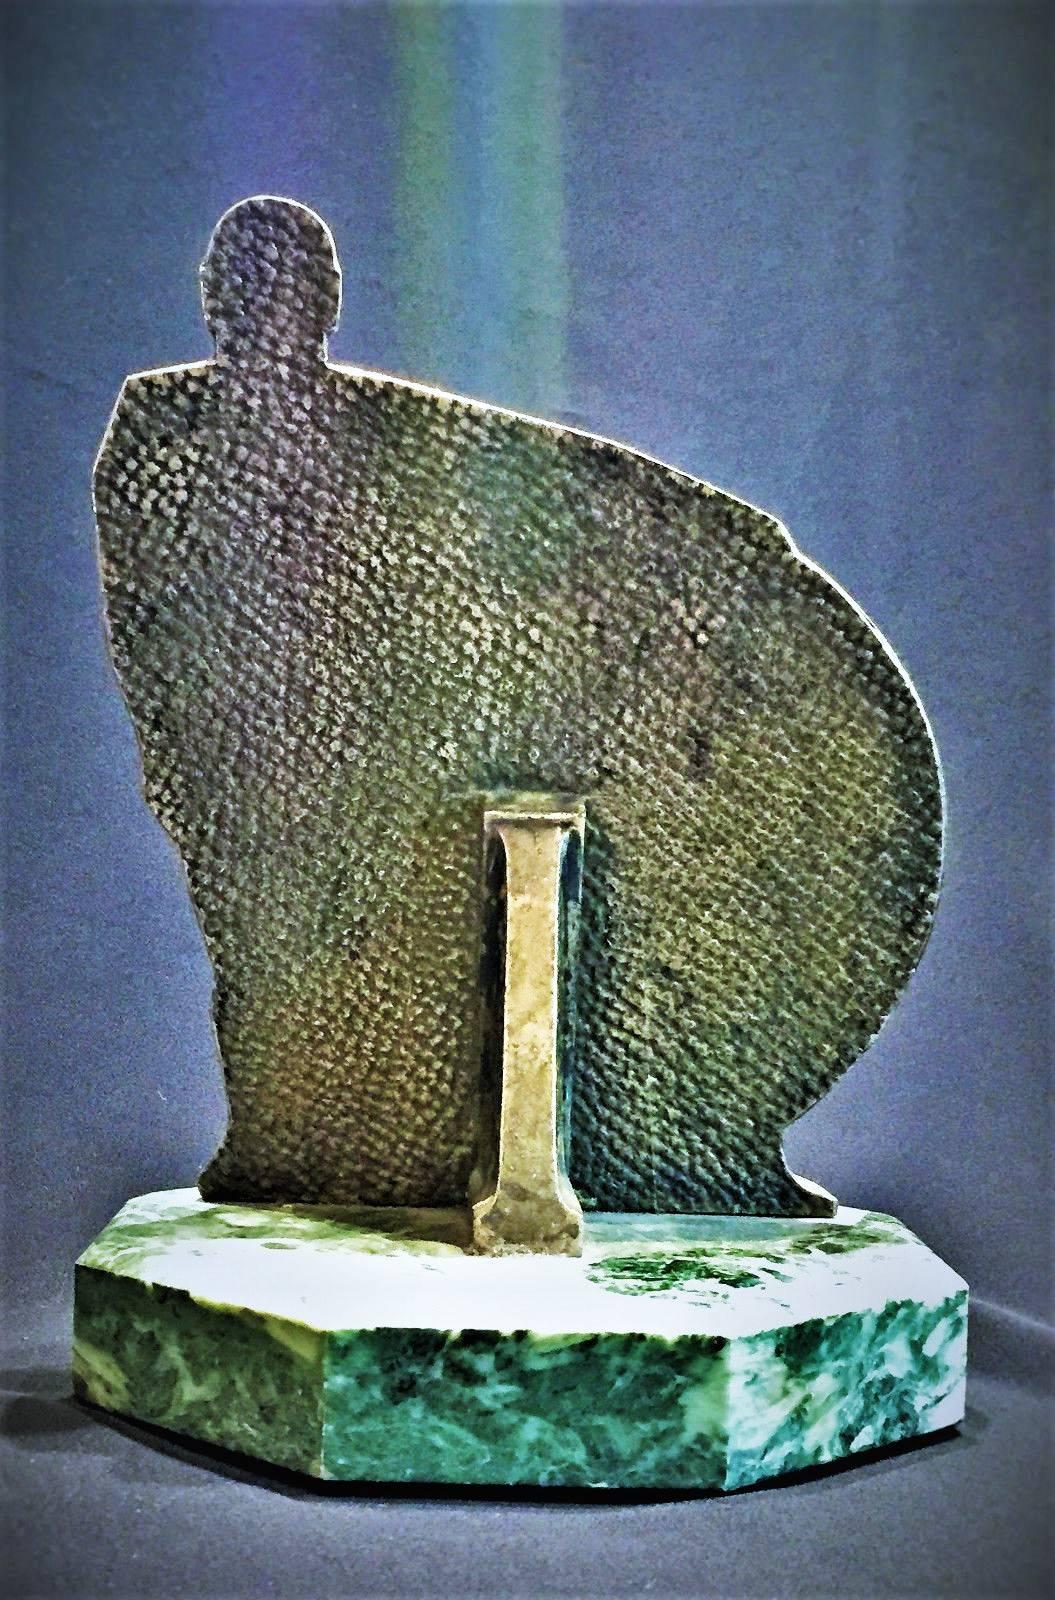 Hand-Crafted Vintage American Sculptural Award Prize Trophy, circa 1969 For Sale